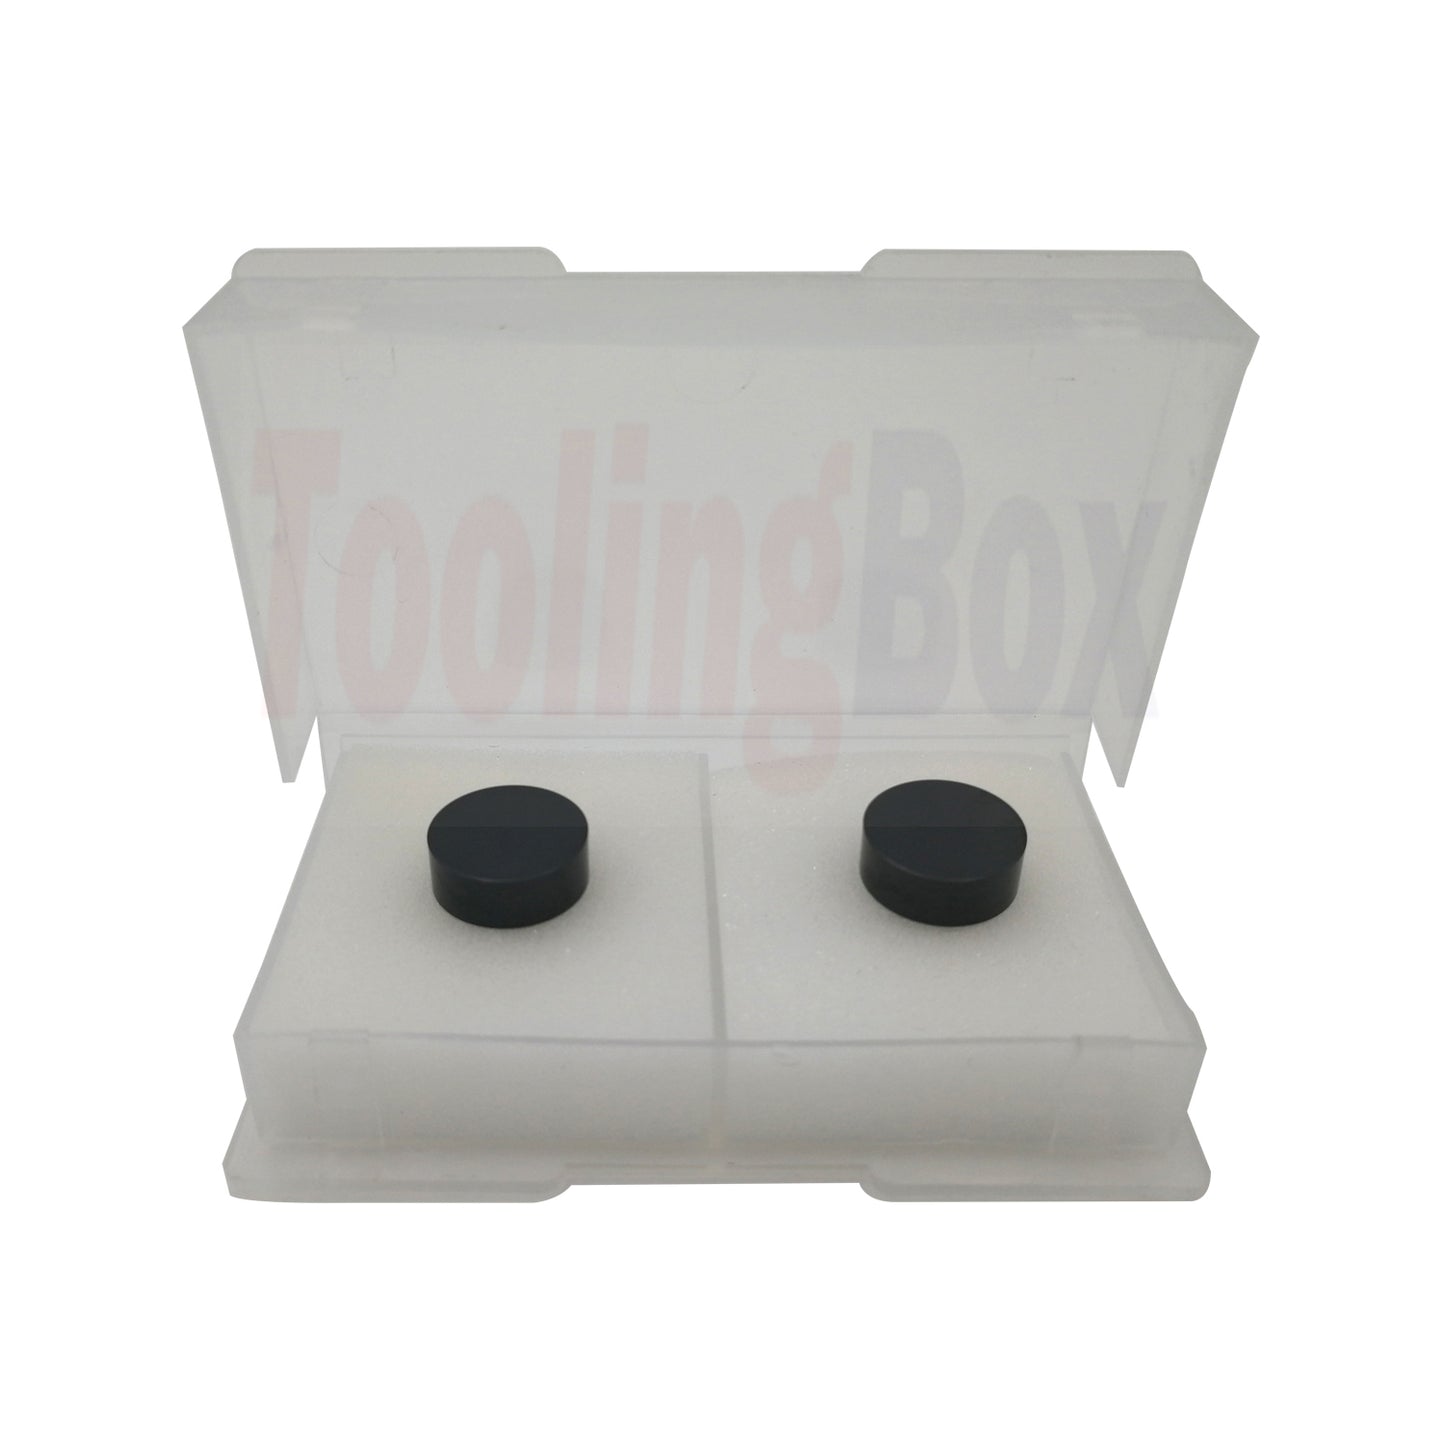 Solid CBN inserts RNMN090300S TB100 for grey cast iron rough milling - fits SECO milling cutters